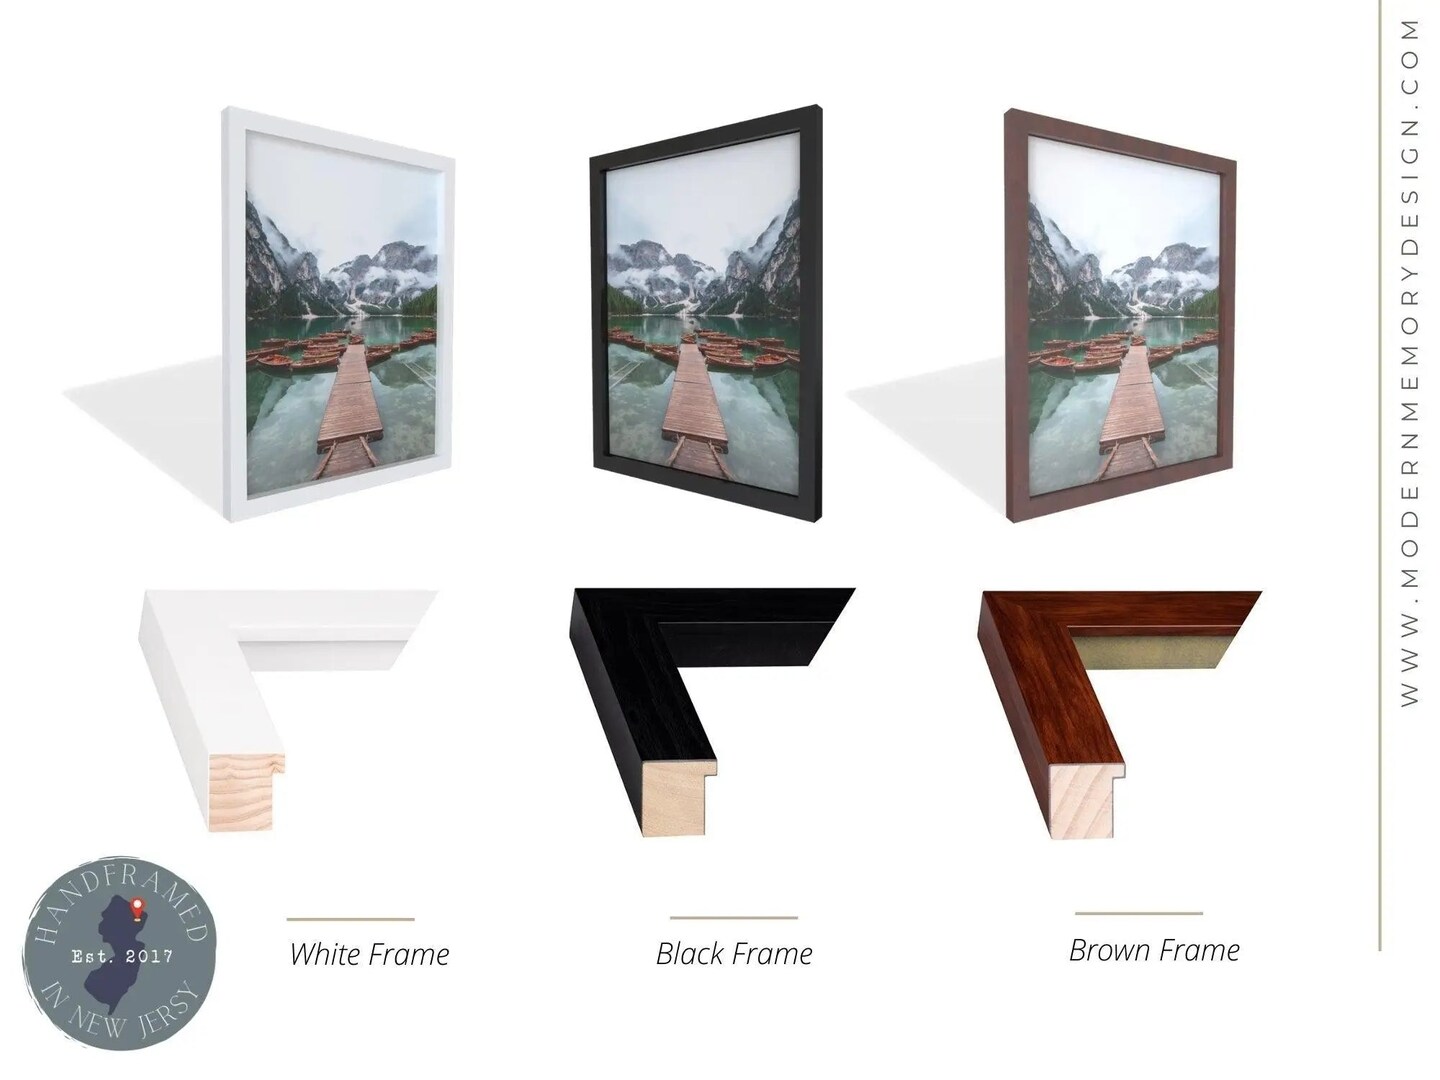 14 Cheap Picture Frame Sources - Best Michaels, IKEA, Target & More Frames